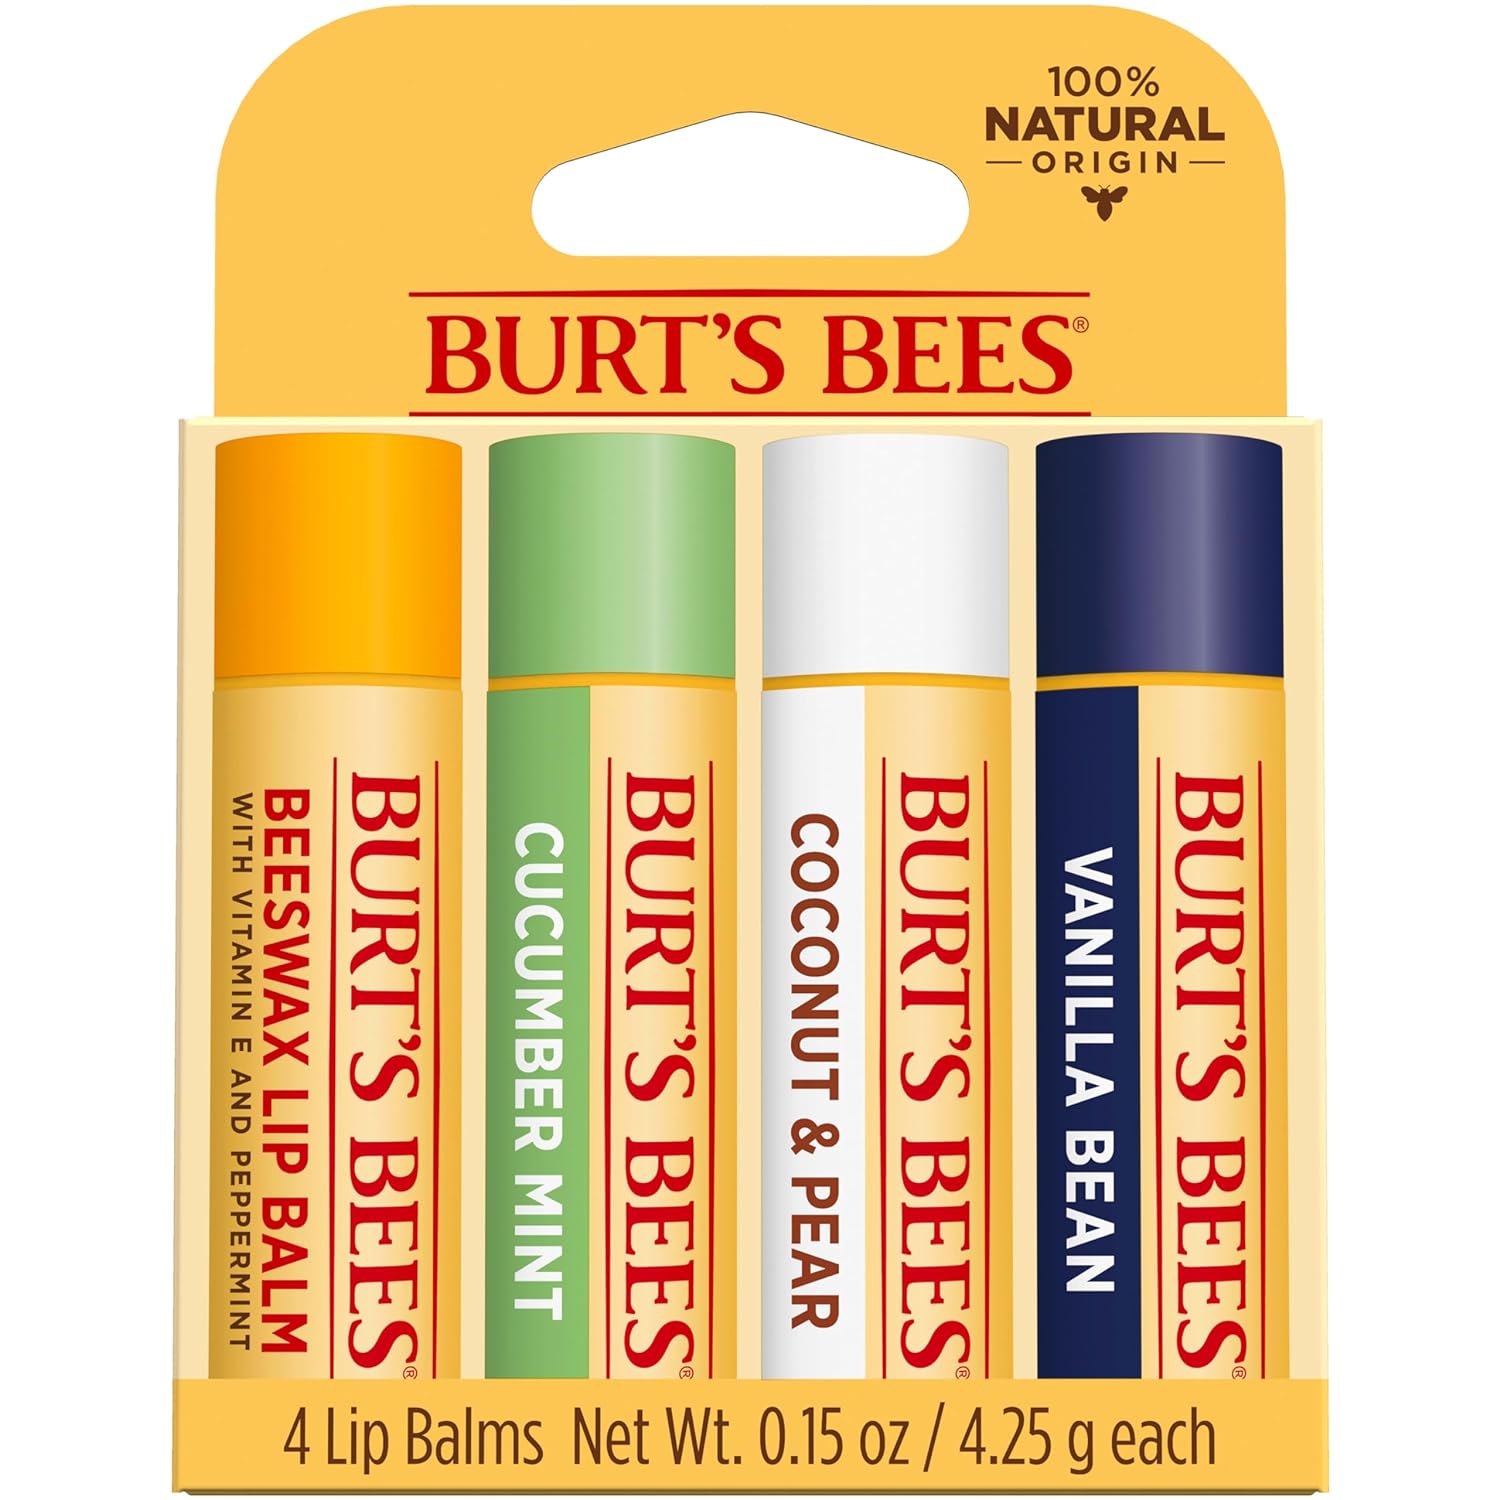 Burt's Bees Lip Balm Mothers Day Gifts for Mom - Beeswax, Cucumber Mint, Coconut & Pear, and Vanilla Bean, With Responsibly Sourced Beeswax, Tint-Free, Natural Origin Lip Treatment, 4 Tubes, 0.15 oz